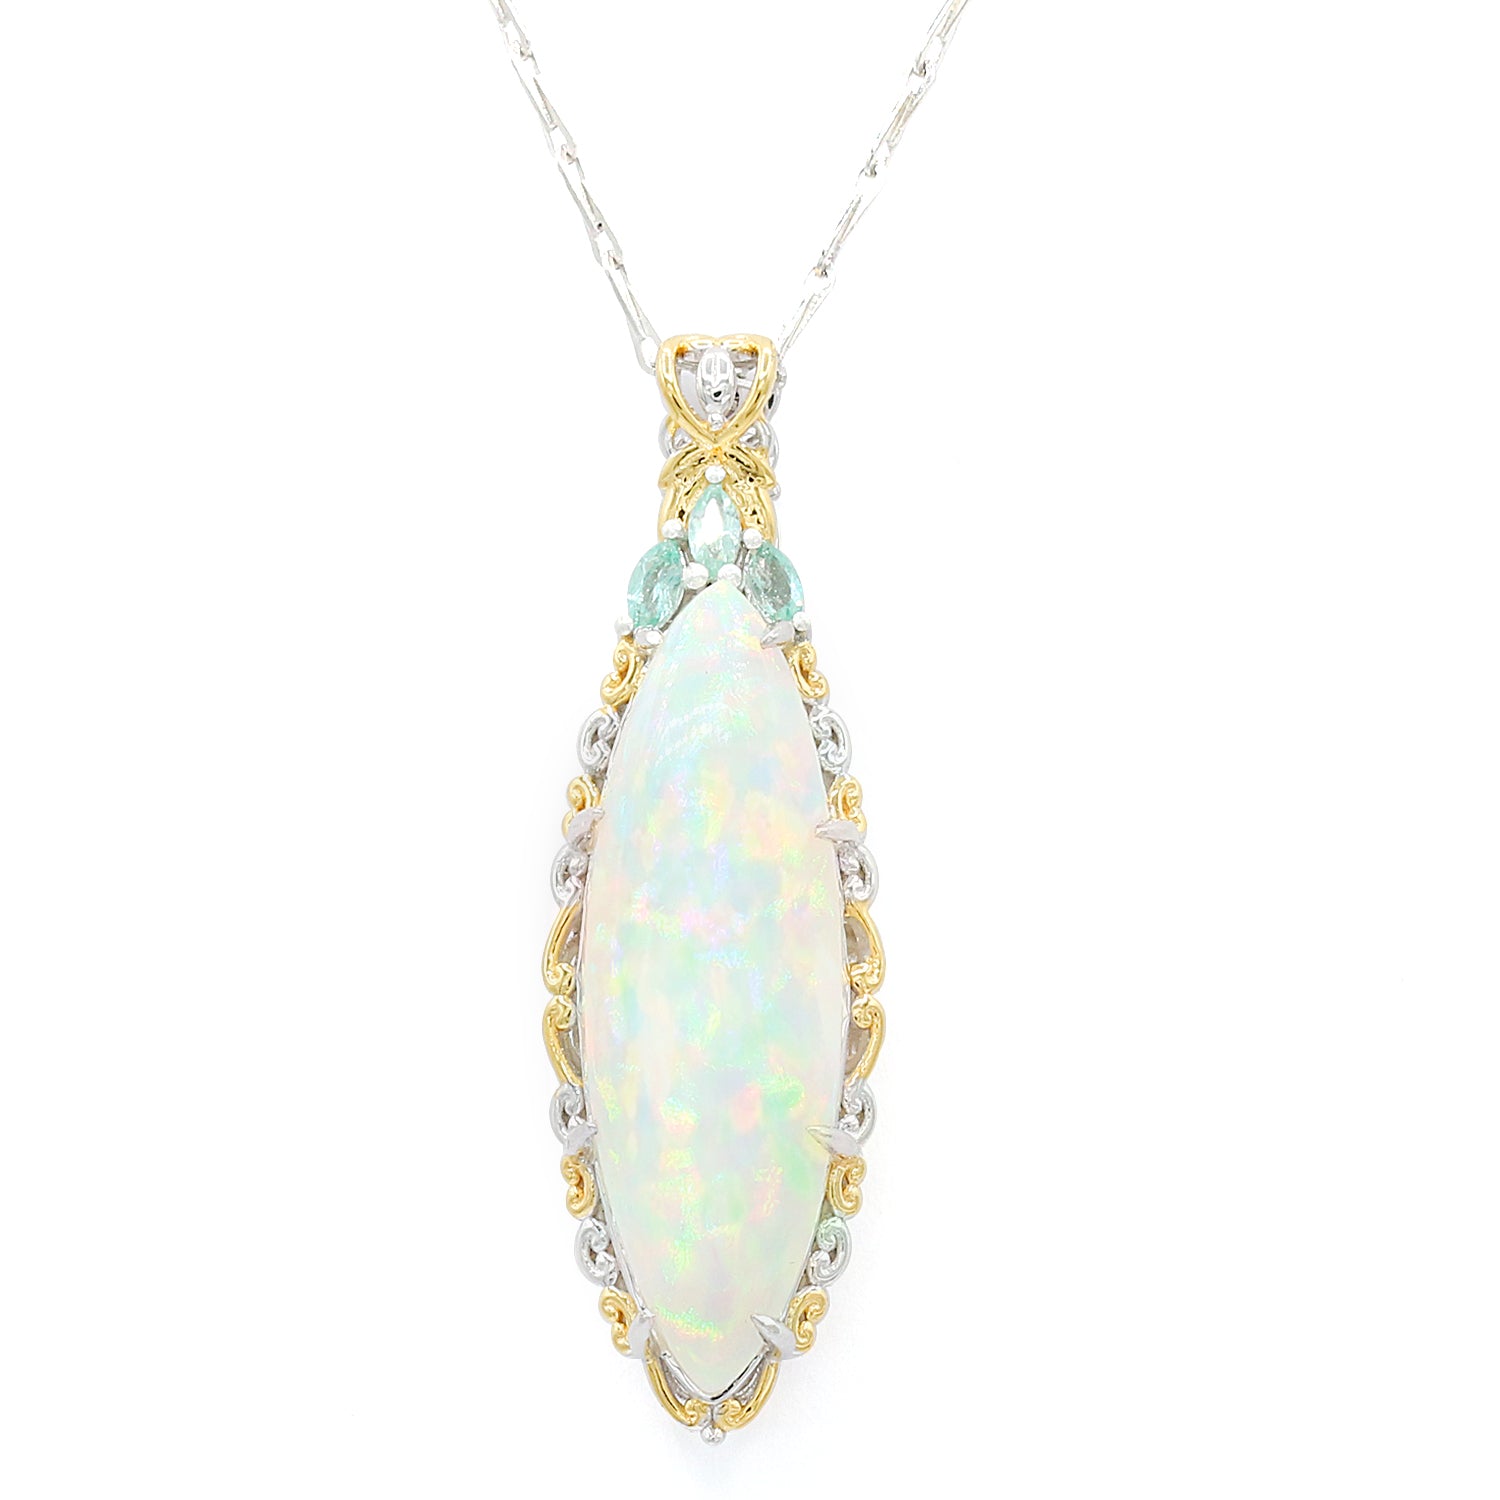 Limited Edition Gems en Vogue Luxe, One-of-a-Kind 13.42ctw Ethiopian Opal & Dauphin Apatite Pendant